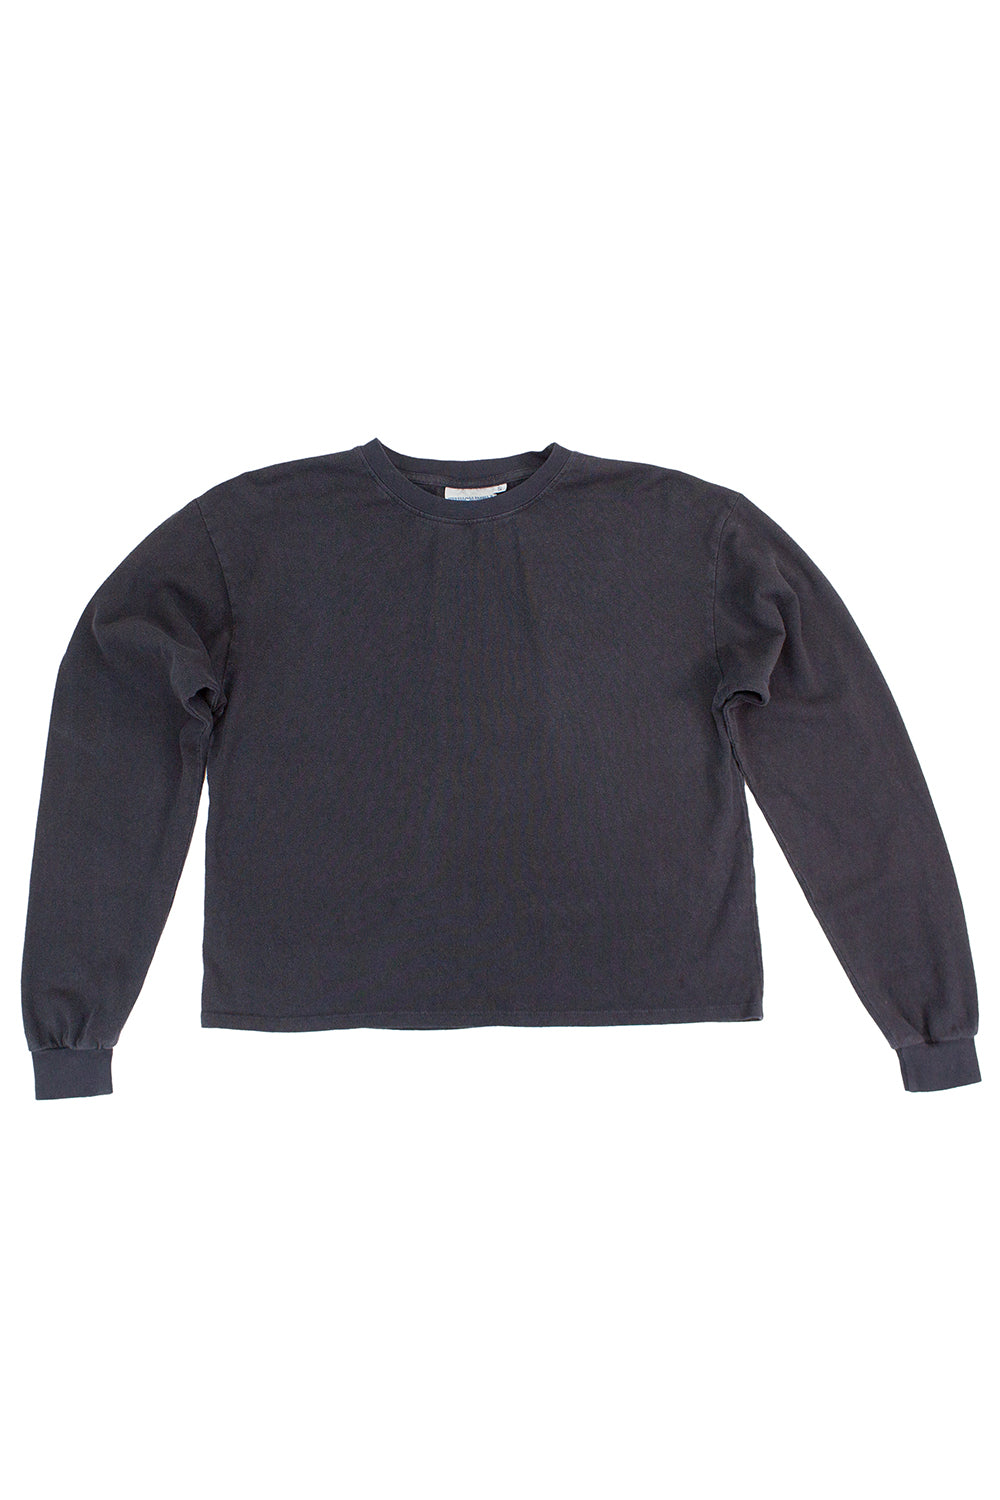 Cropped Long Sleeve Tee | Jungmaven Hemp Clothing & Accessories / Color: Black